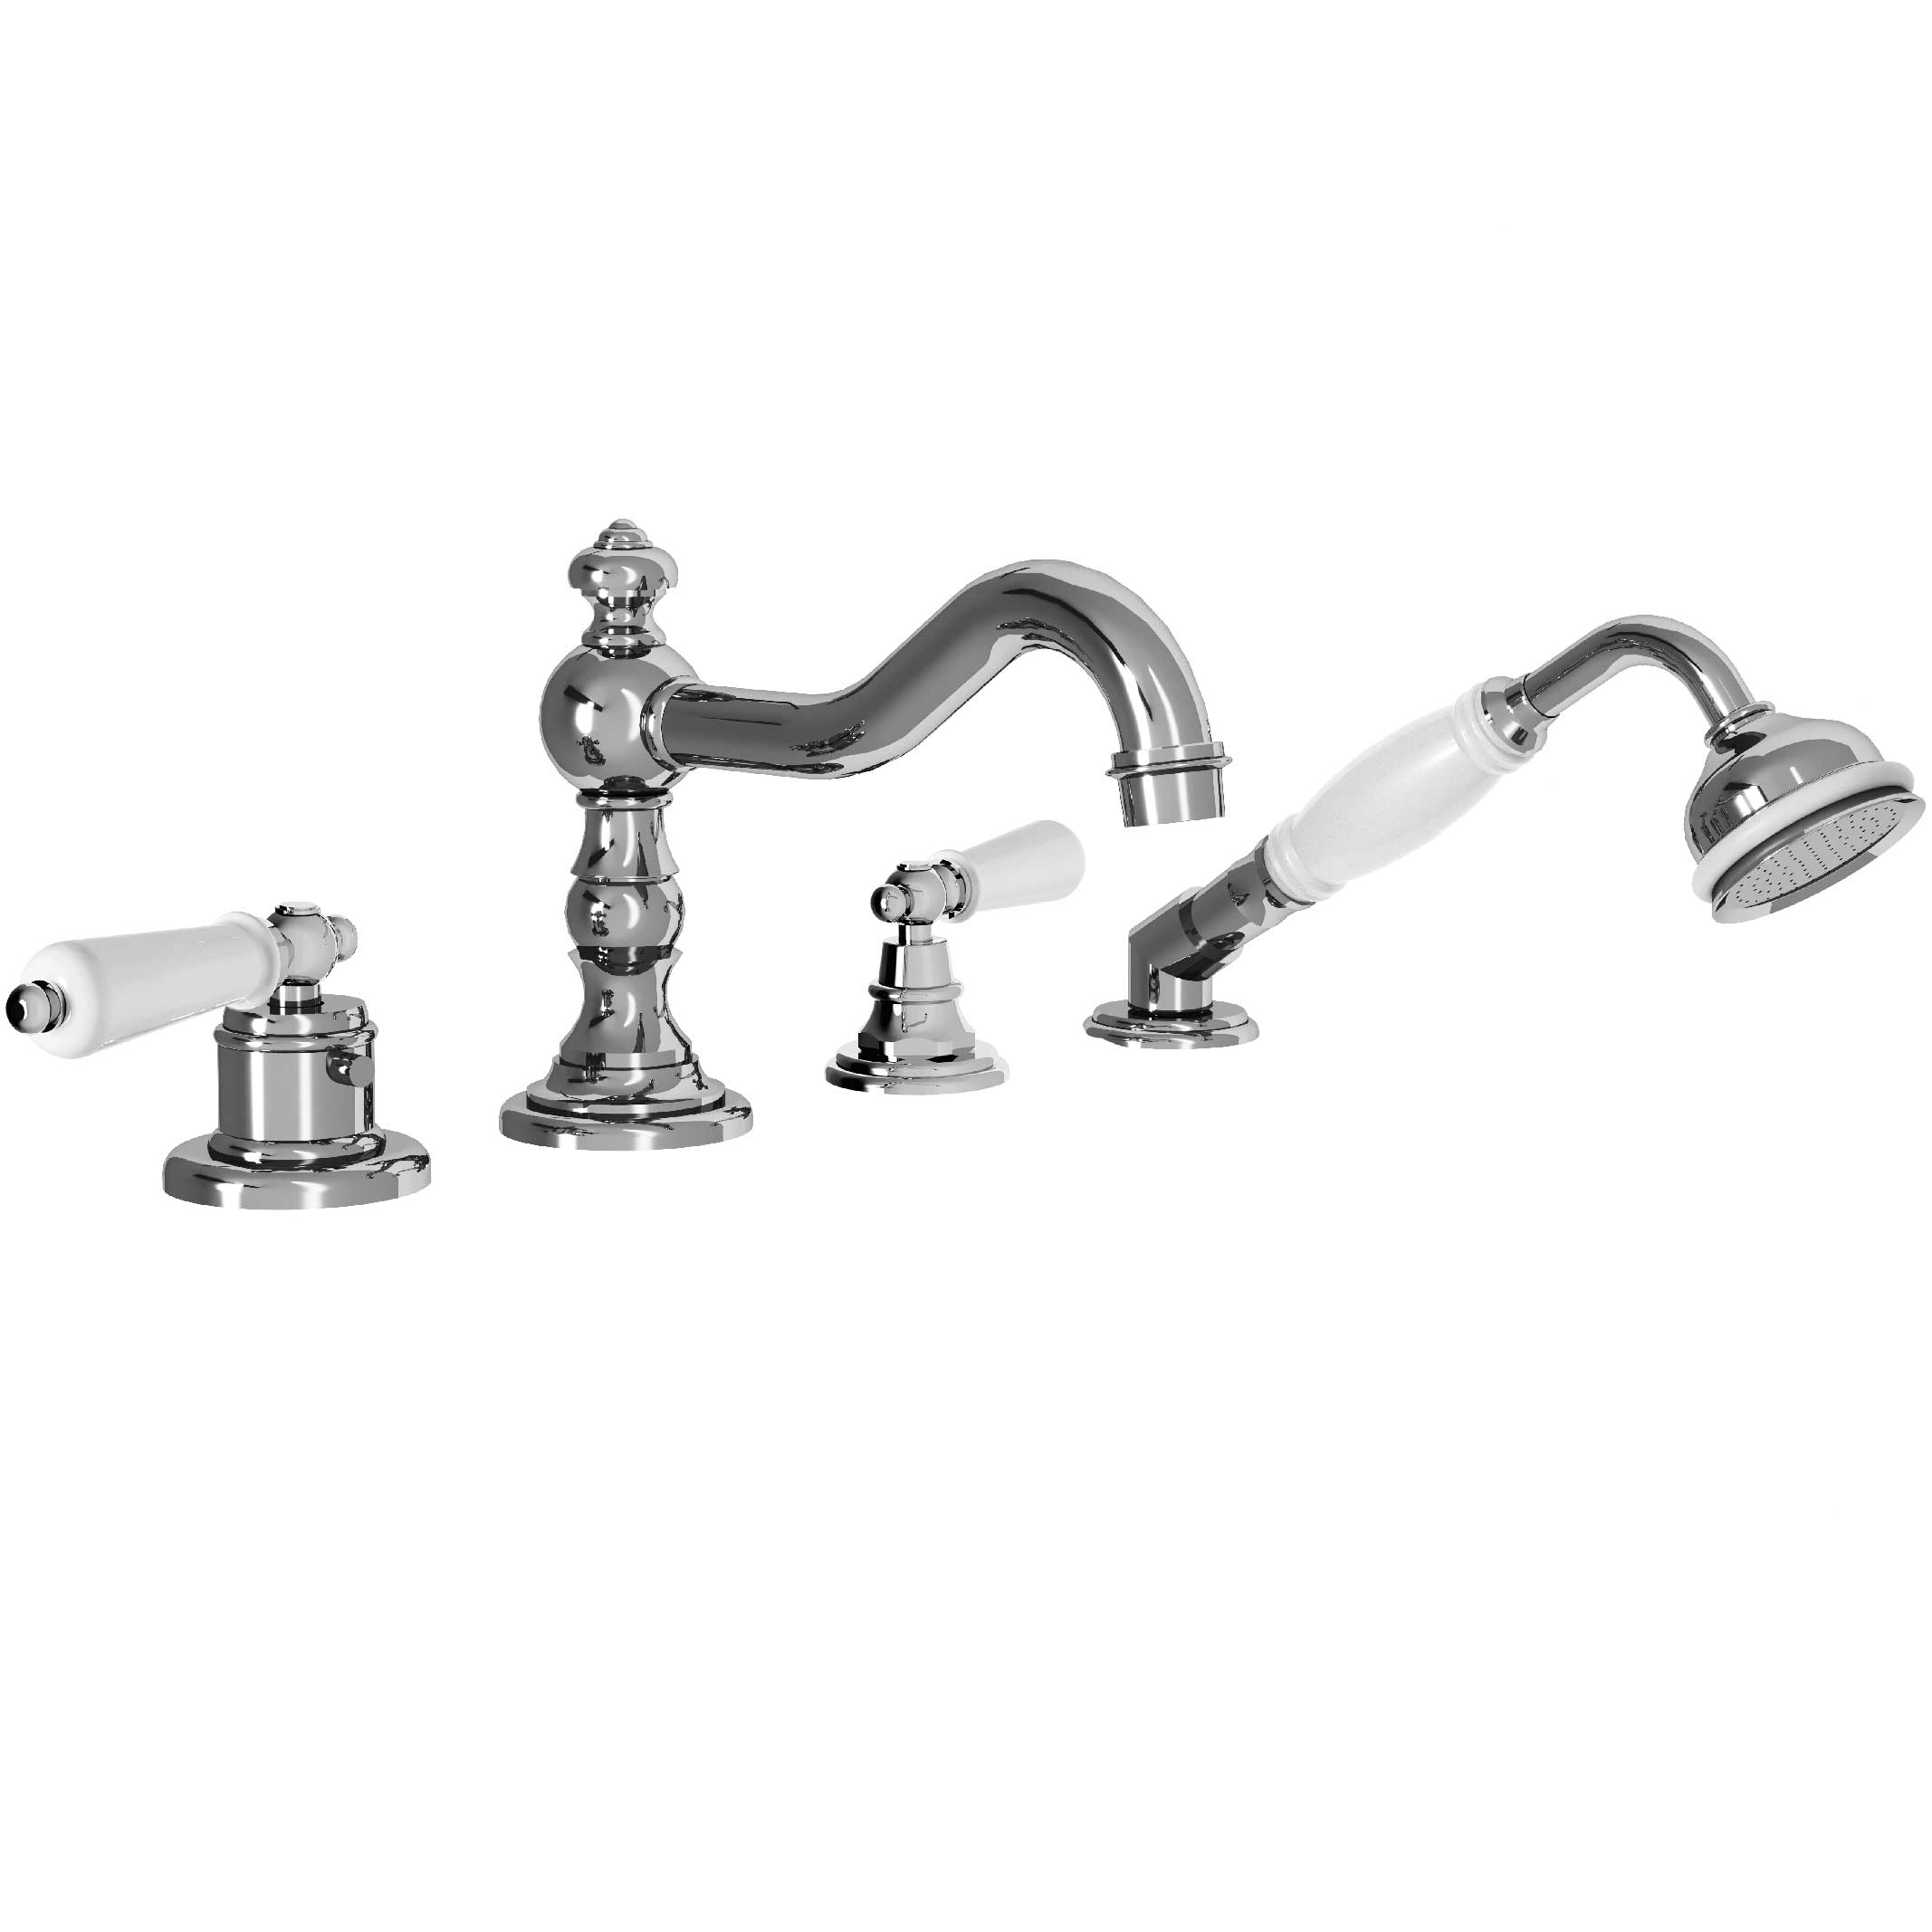 M04-3304T 4-hole bath and shower thermo. mixer